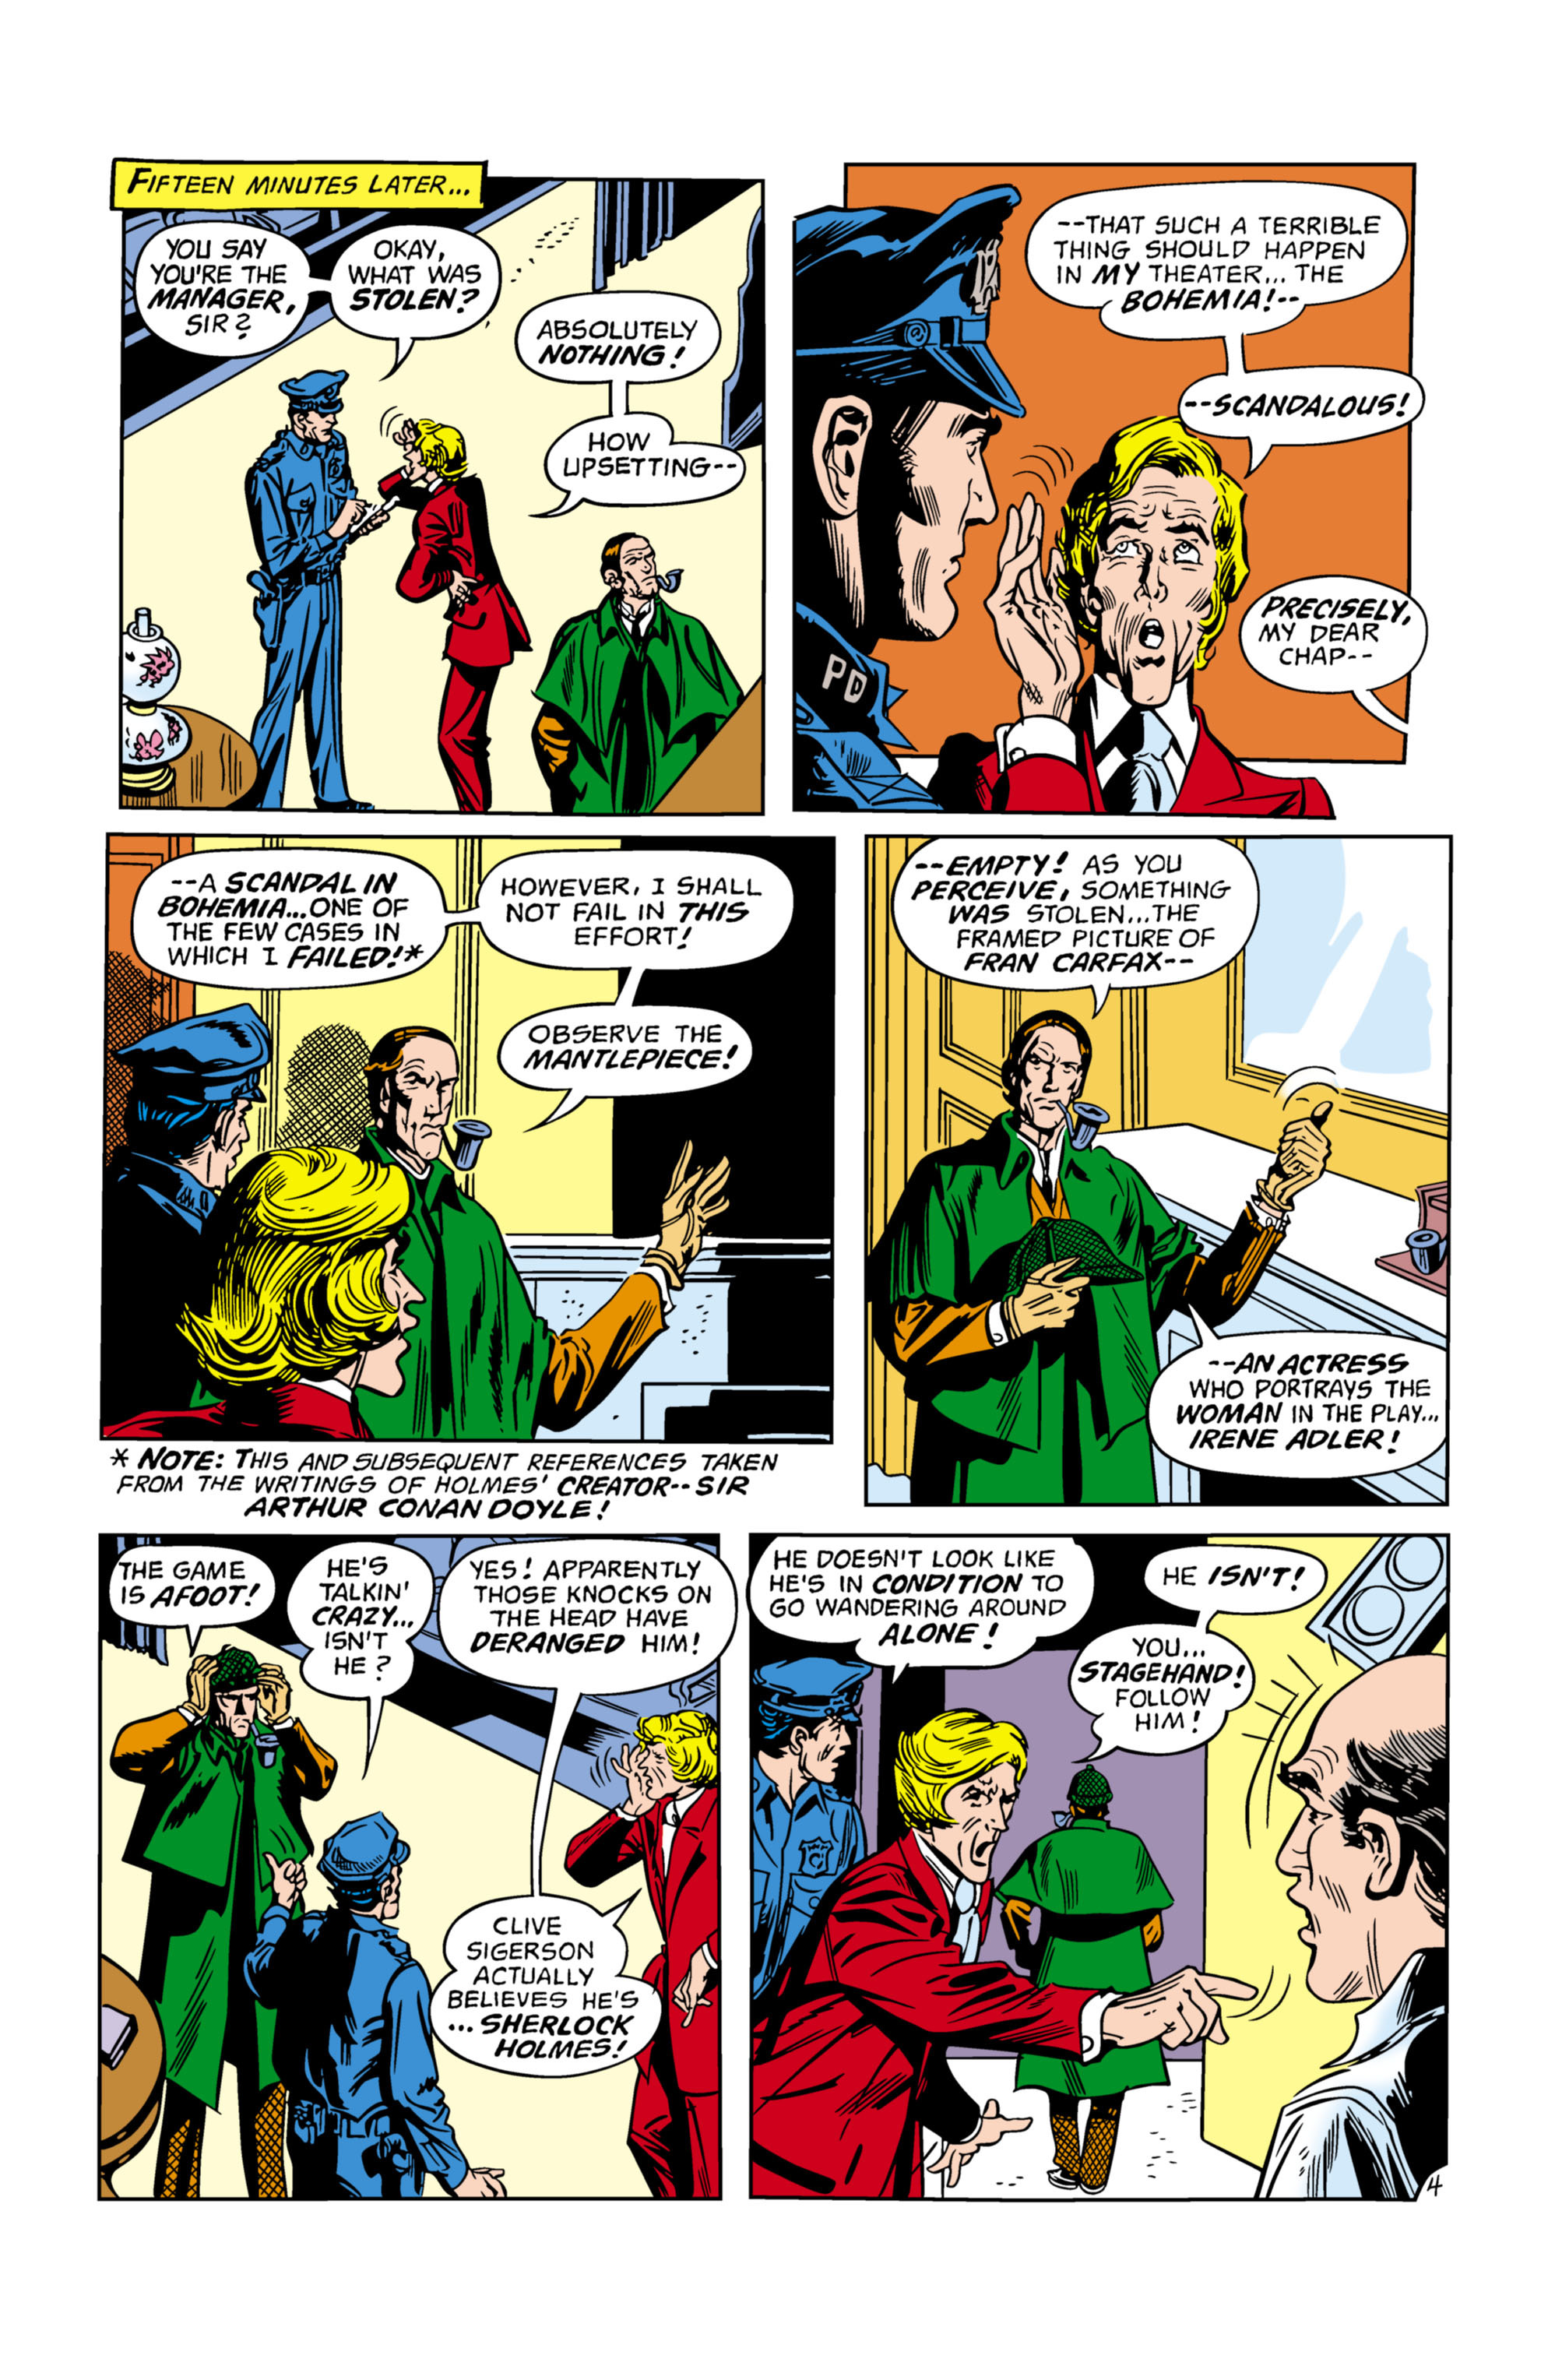 The Joker (1975-1976 + 2019): Chapter 6 - Page 5